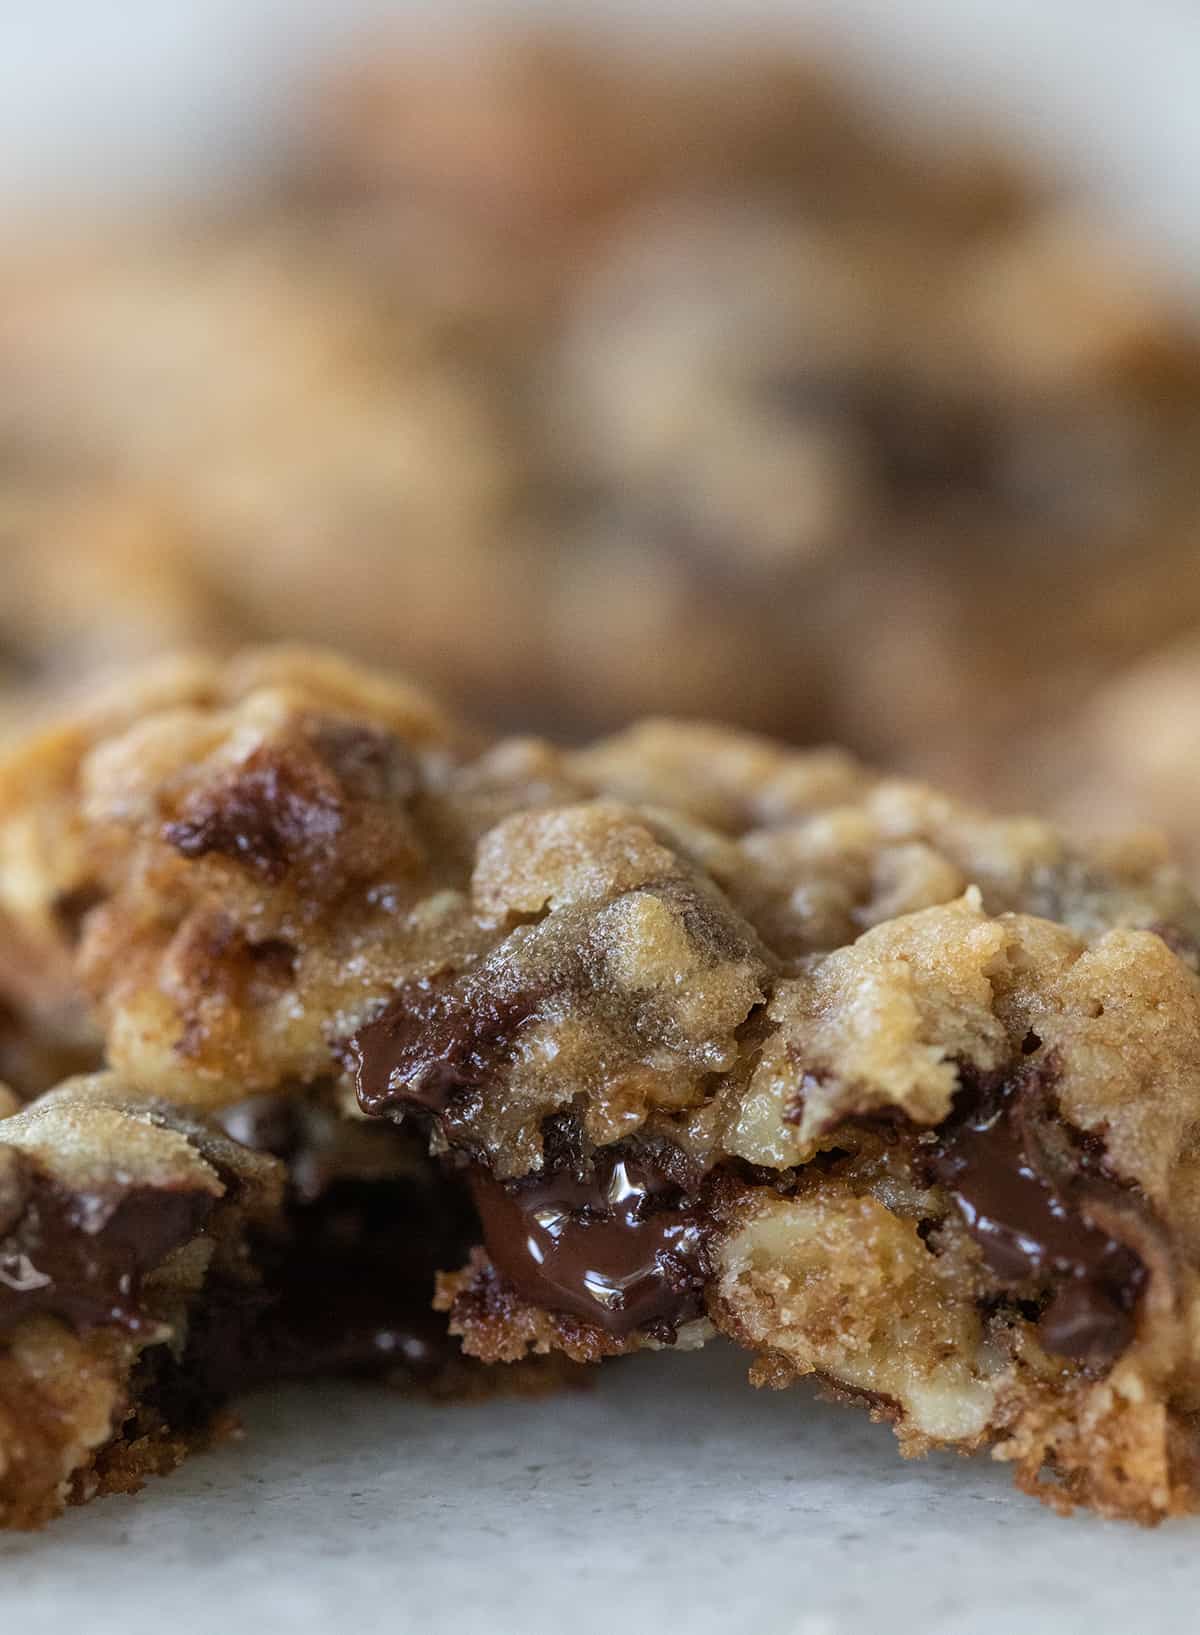 The inside of a chocolate chip cookie with walnuts.